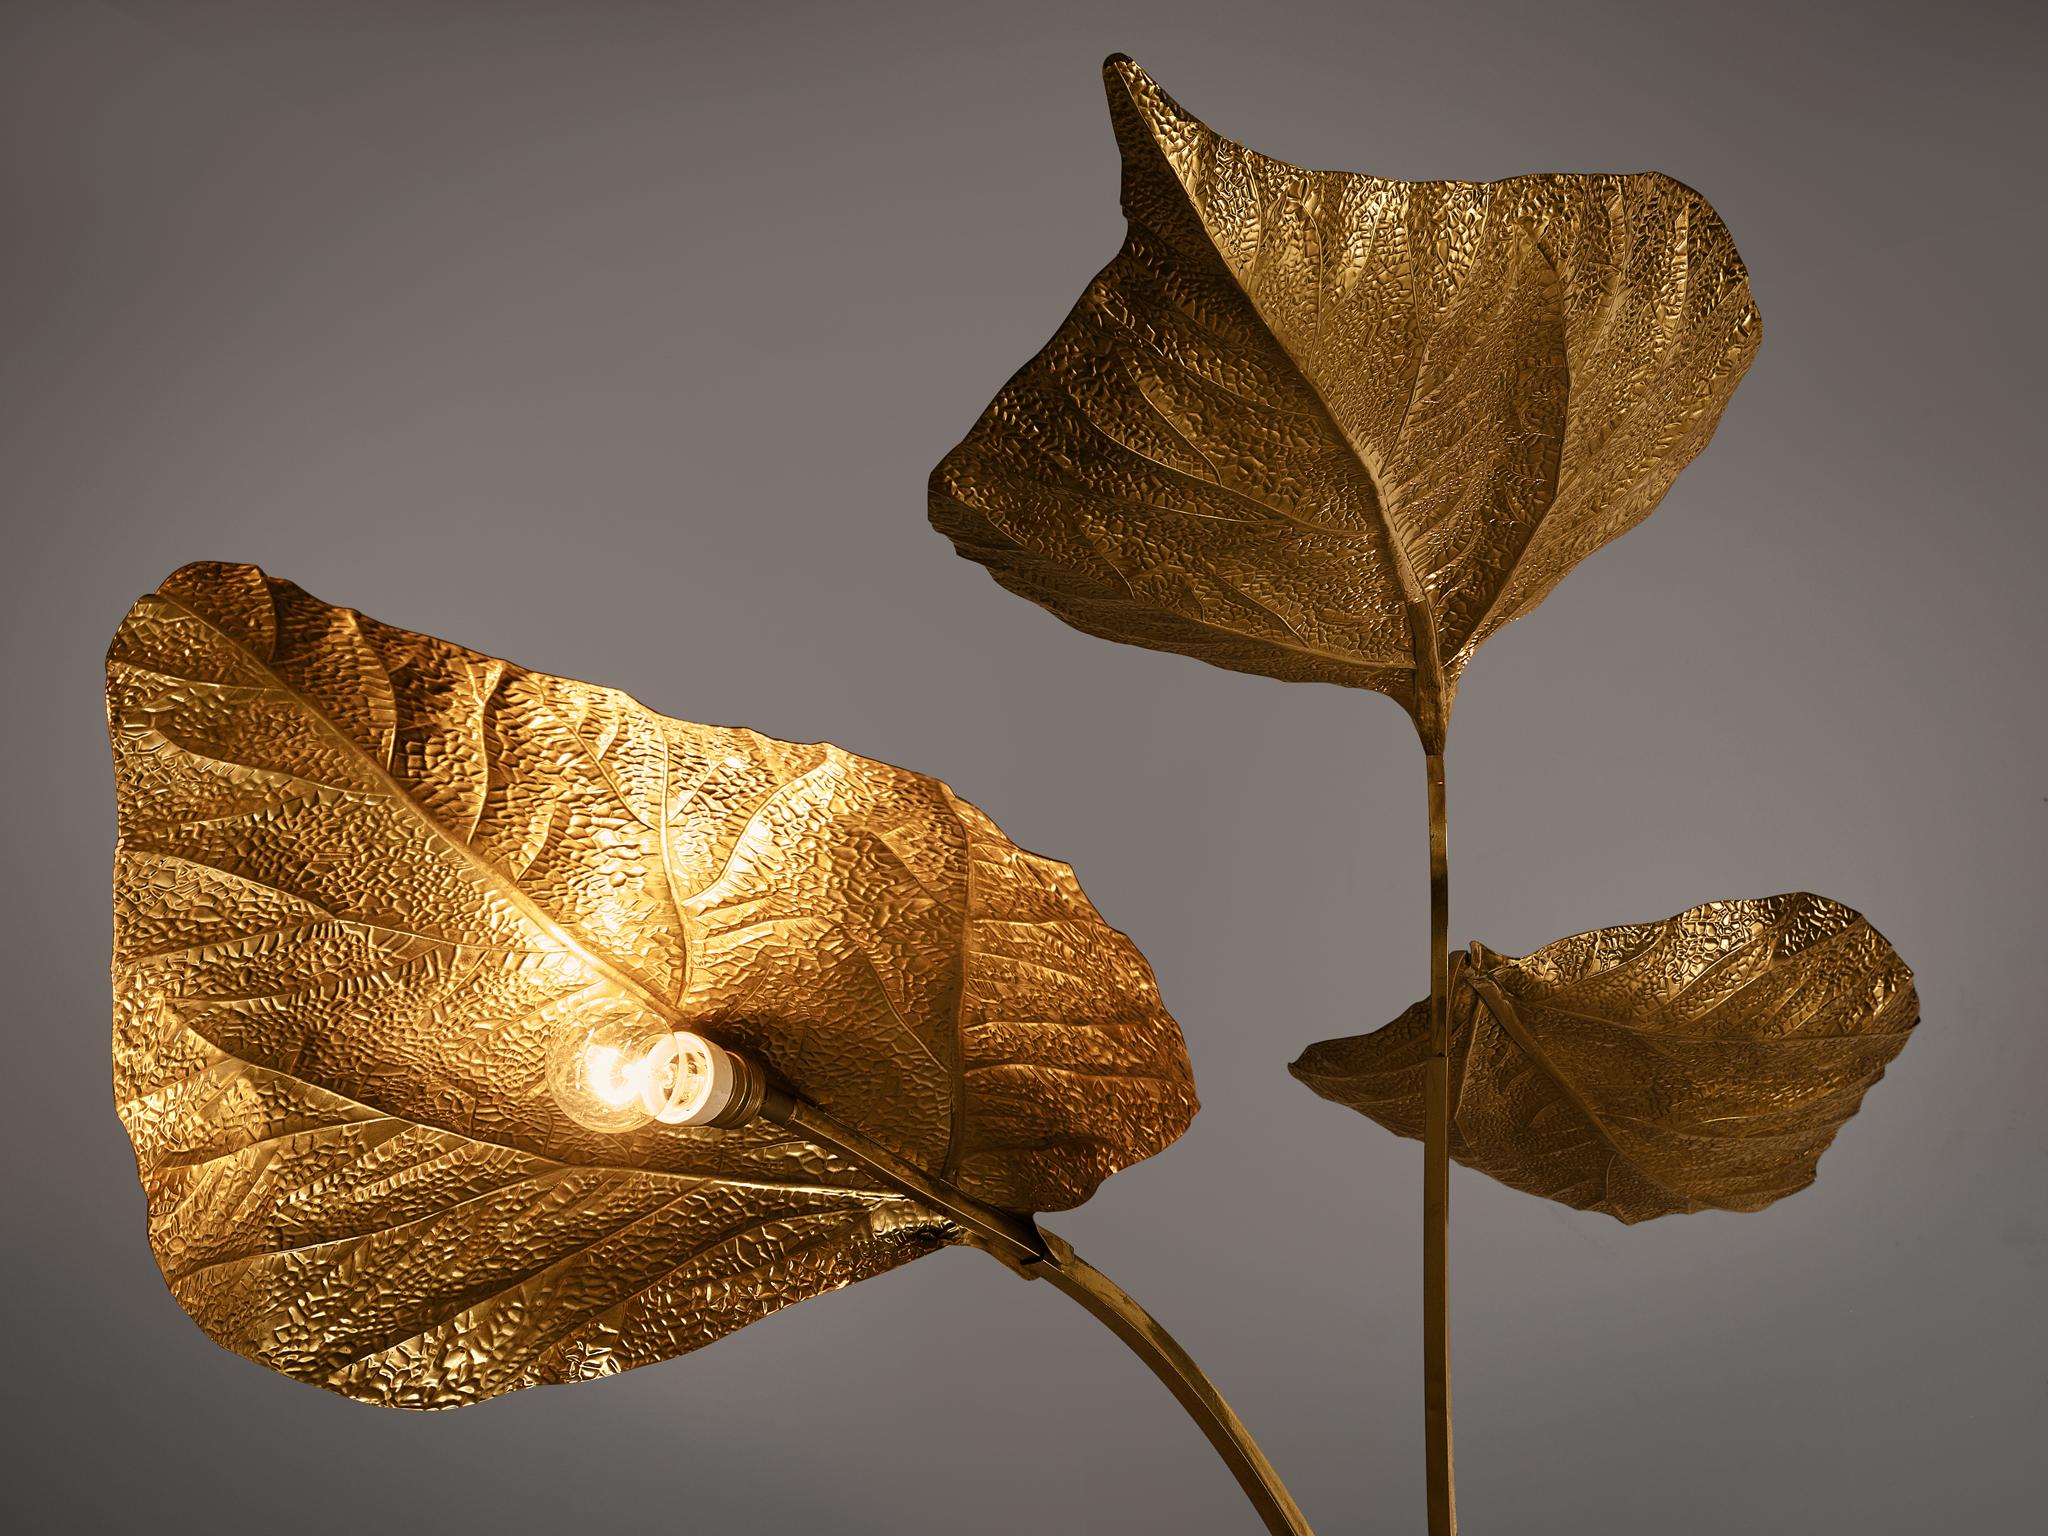 Tommaso Barbi, organic leaf floor lamp, brass, Italy, 1970s

Very elegant hammered brass floor lamp, presenting large rhubarb leaves. The extravagant style and amazing craftsmanship is characteristic for Tommaso Barbi's work.  The standing lamp has